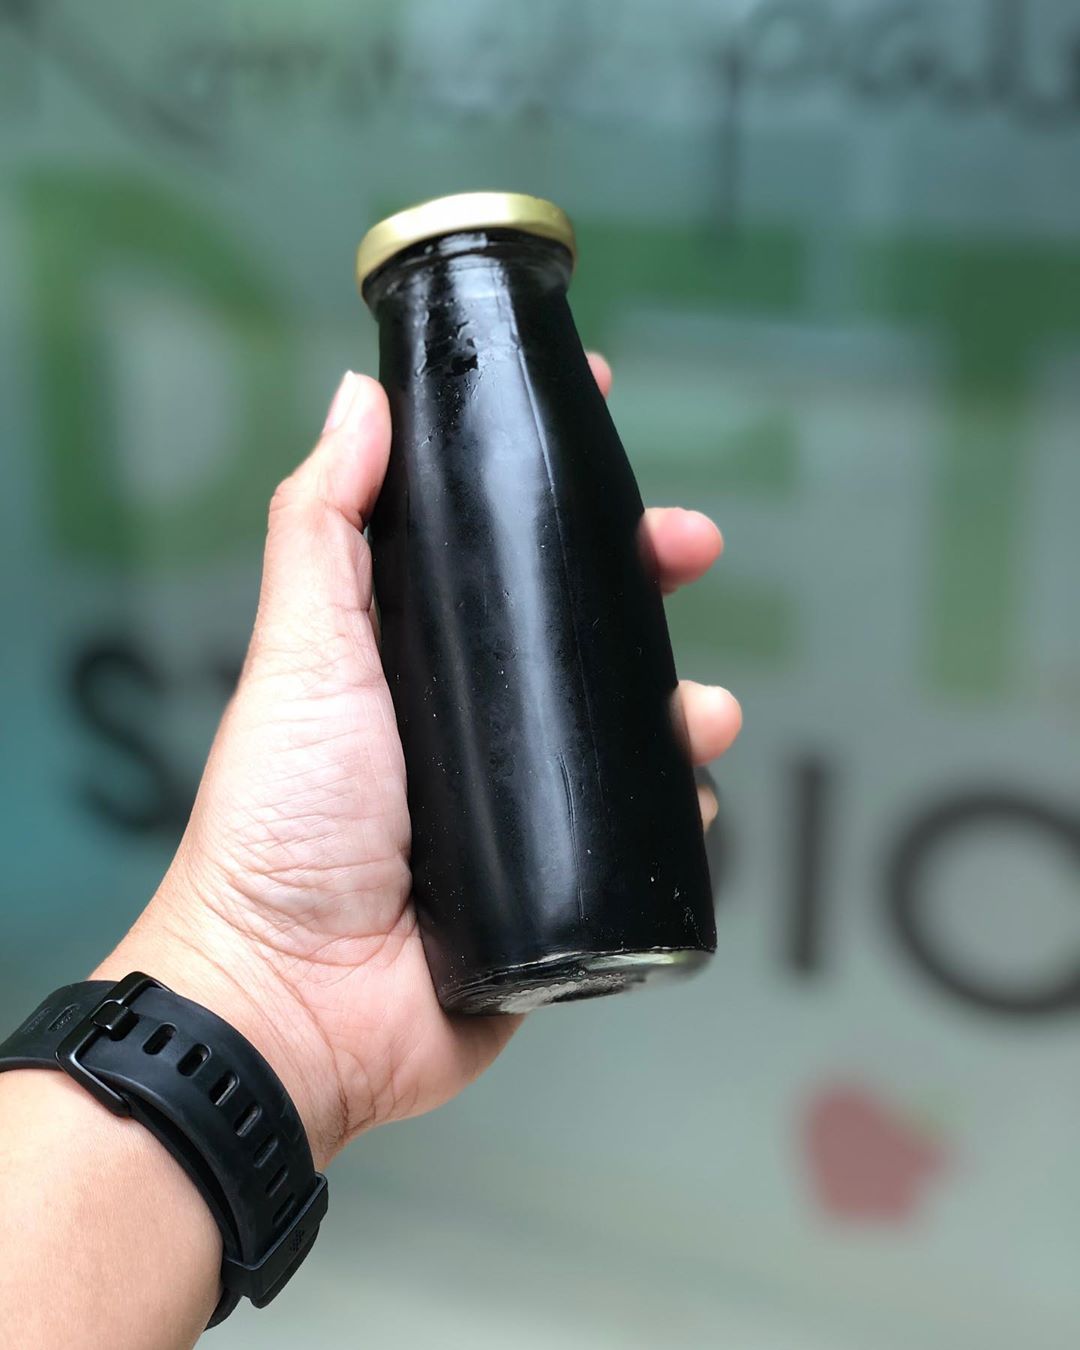 Giving a try on activated charcoal lemonade.
Charcoal helps to trap toxins and chemicals in the body and then flushing them off the body.
U just have to drink enough water after taking activated charcoal to flush off....
#activatedcharcoal #detox #vegjuice